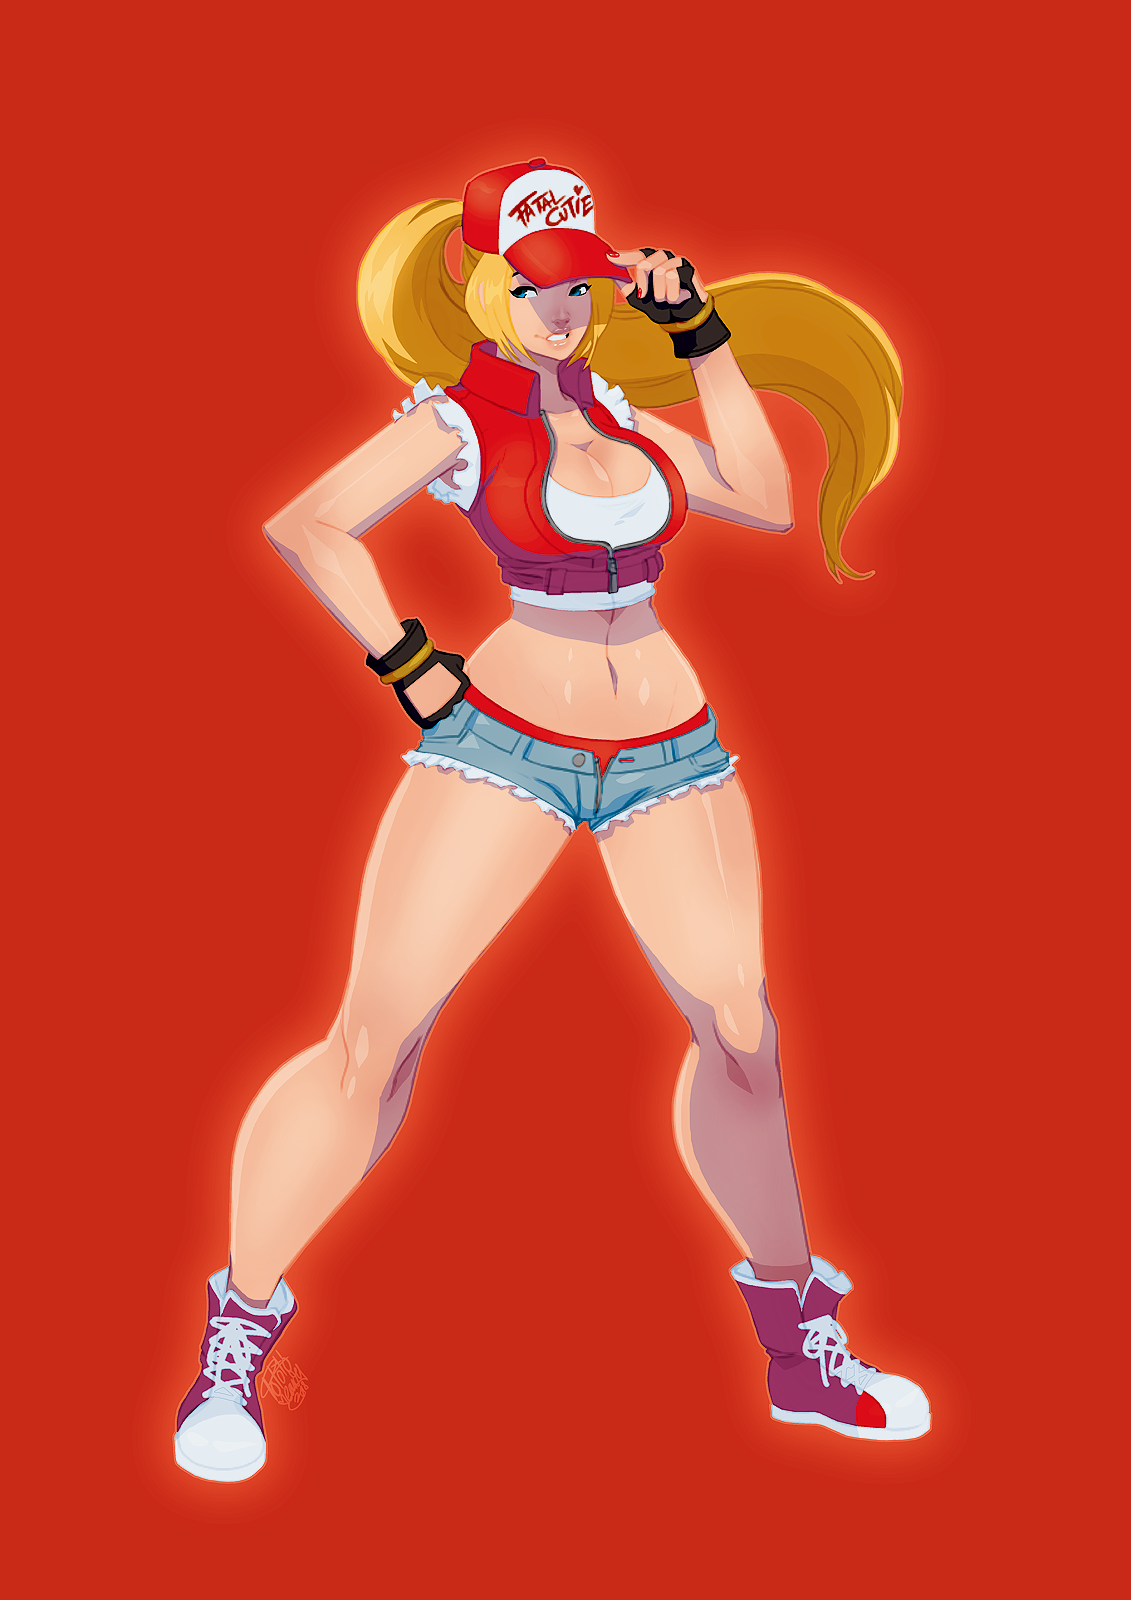 tovio-rogers:  female terry bogard from sknk heroines drawn up for fun. prolly gonna